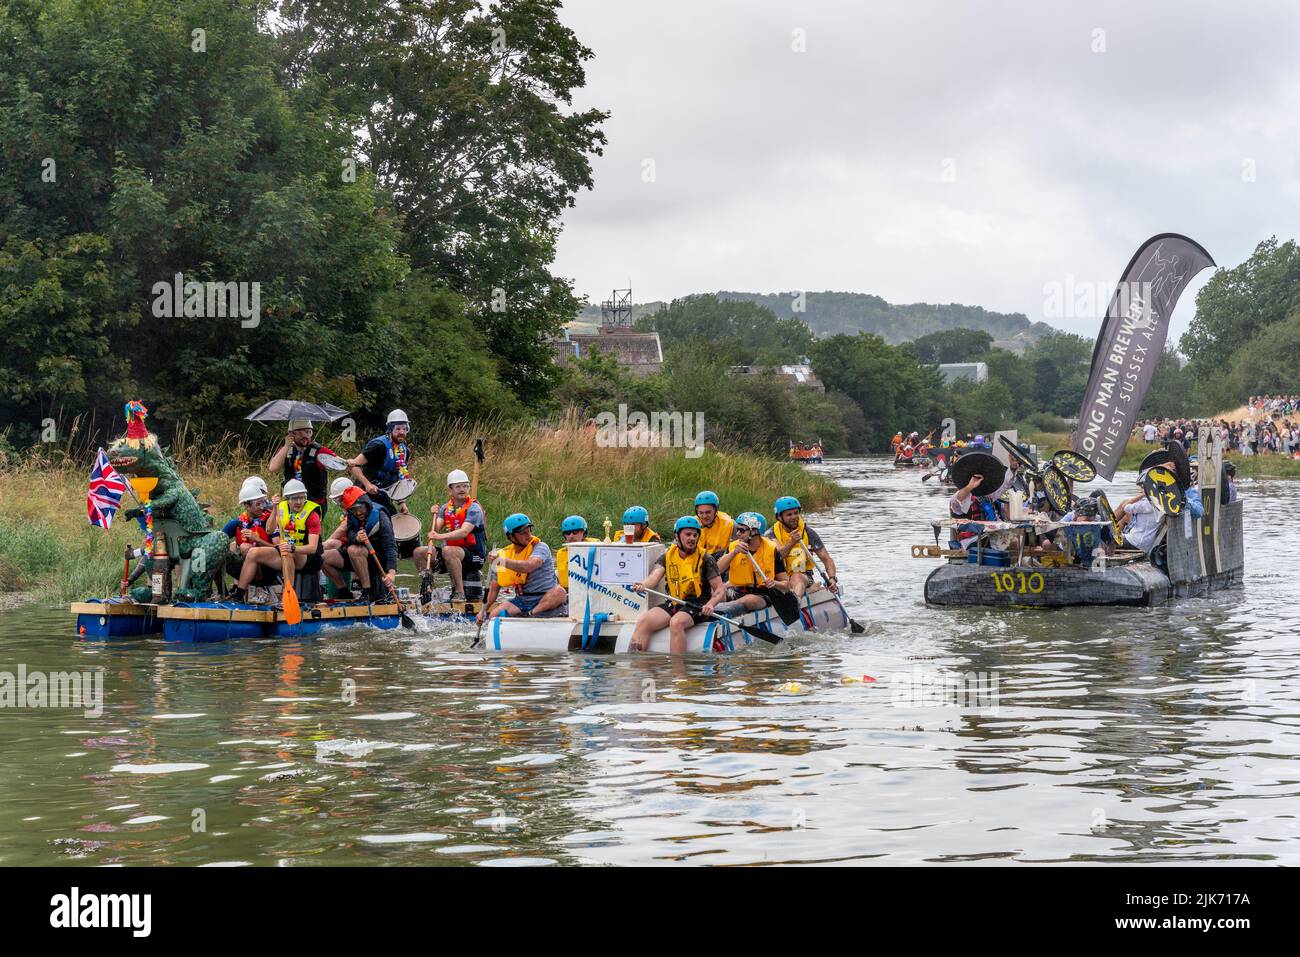 Lewes, UK. 31st July, 2022. Local people in home made rafts take part in the Lewes Raft Race on the River Ouse from Lewes to Newhaven. The Raft Race is an annual event organised by Lewes Round Table in aid of local charities. Traditionally, spectators line up on the riverbank and throw eggs and flour at the rafts with the people on the rafts protecting themselves with home made shields. Credit: Grant Rooney/Alamy Live News Stock Photo